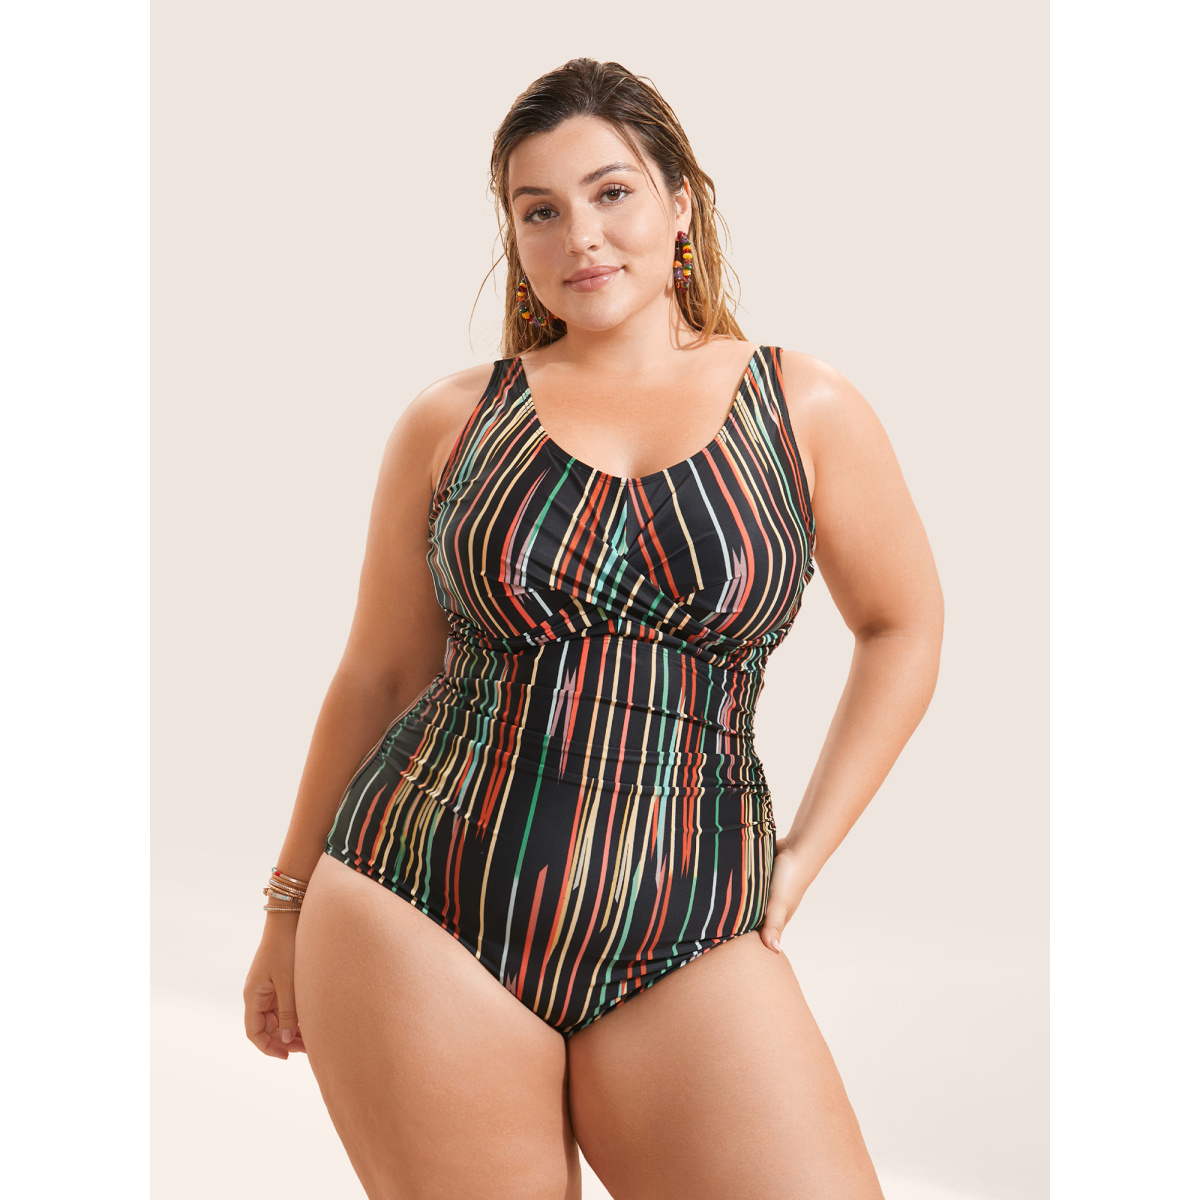 

Plus Size U Neck Stripes Crossover One Piece Swimsuit Women's Swimwear Multicolor Beach Twist Curve Bathing Suits High stretch One Pieces BloomChic